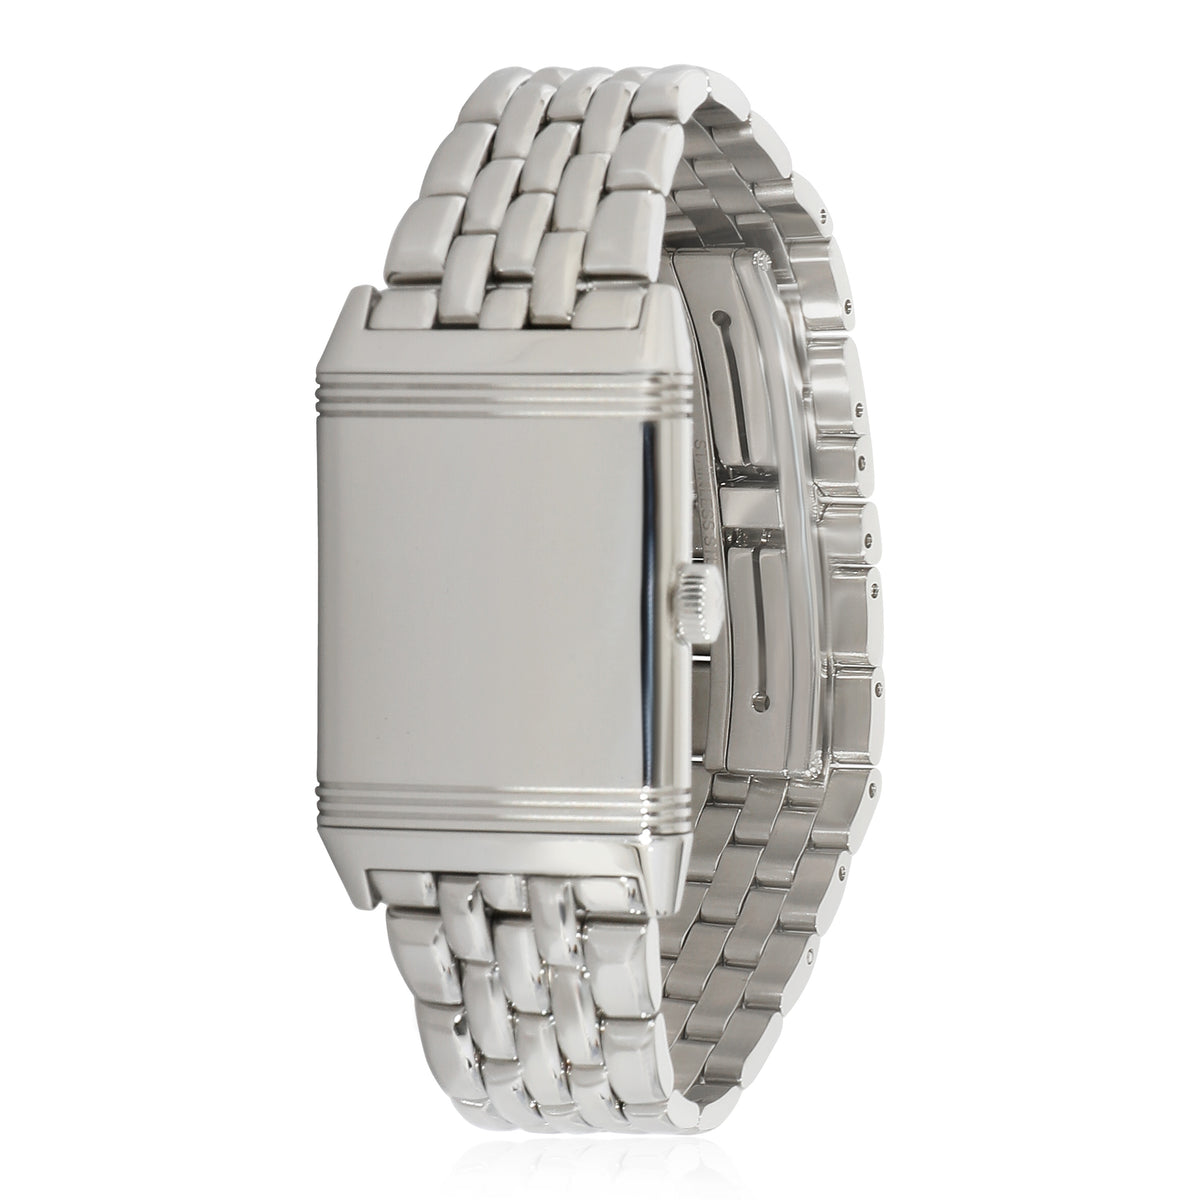 Reverso Classique Q2518140 222.8.47 Unisex Watch in  Stainless